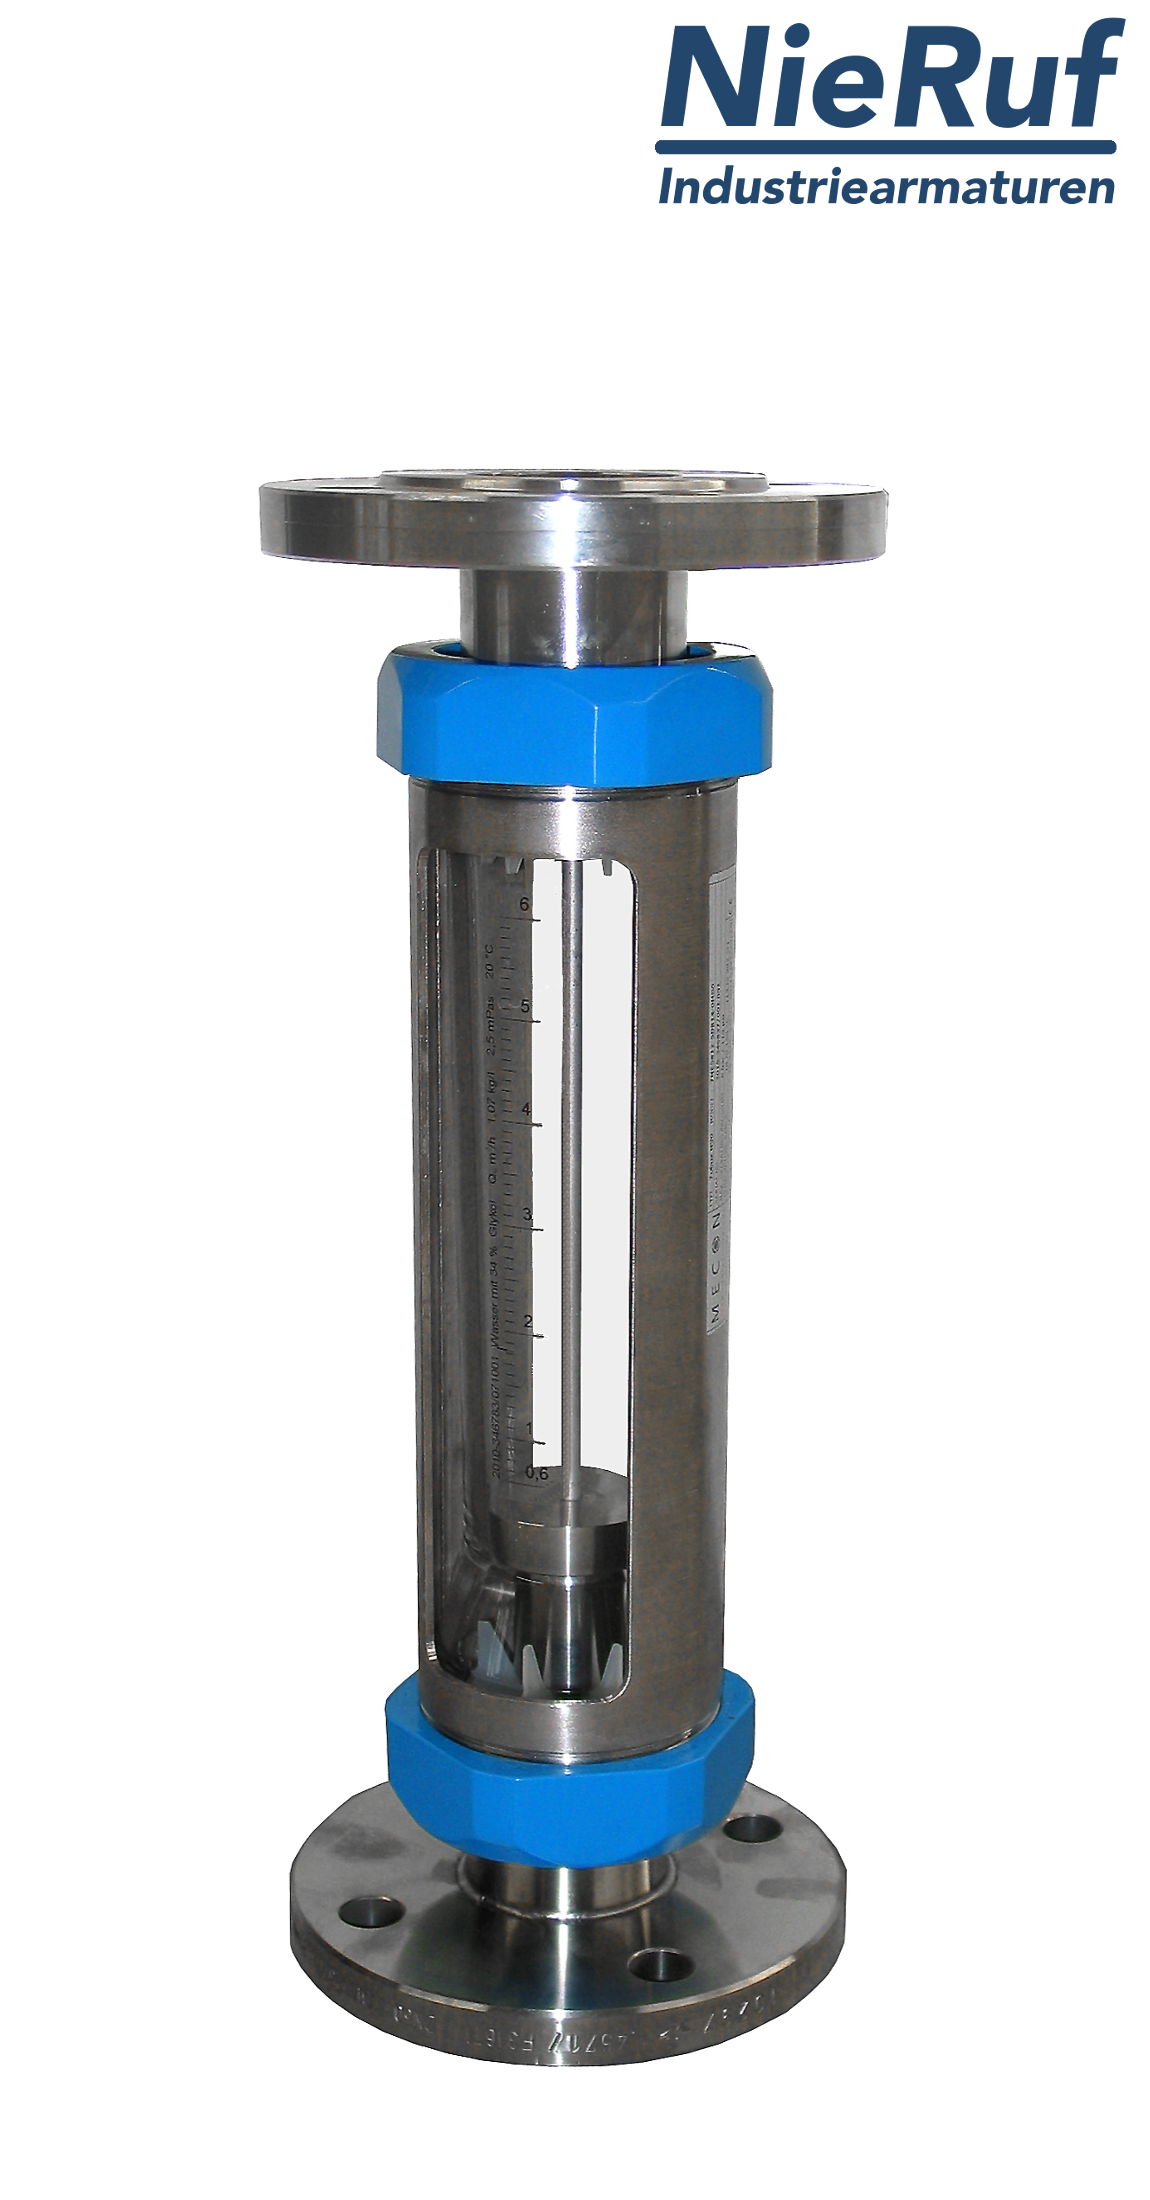 Variable area flowmeter stainless steel + borosilicate flange DN25 200.0 - 2000 l/h water FKM